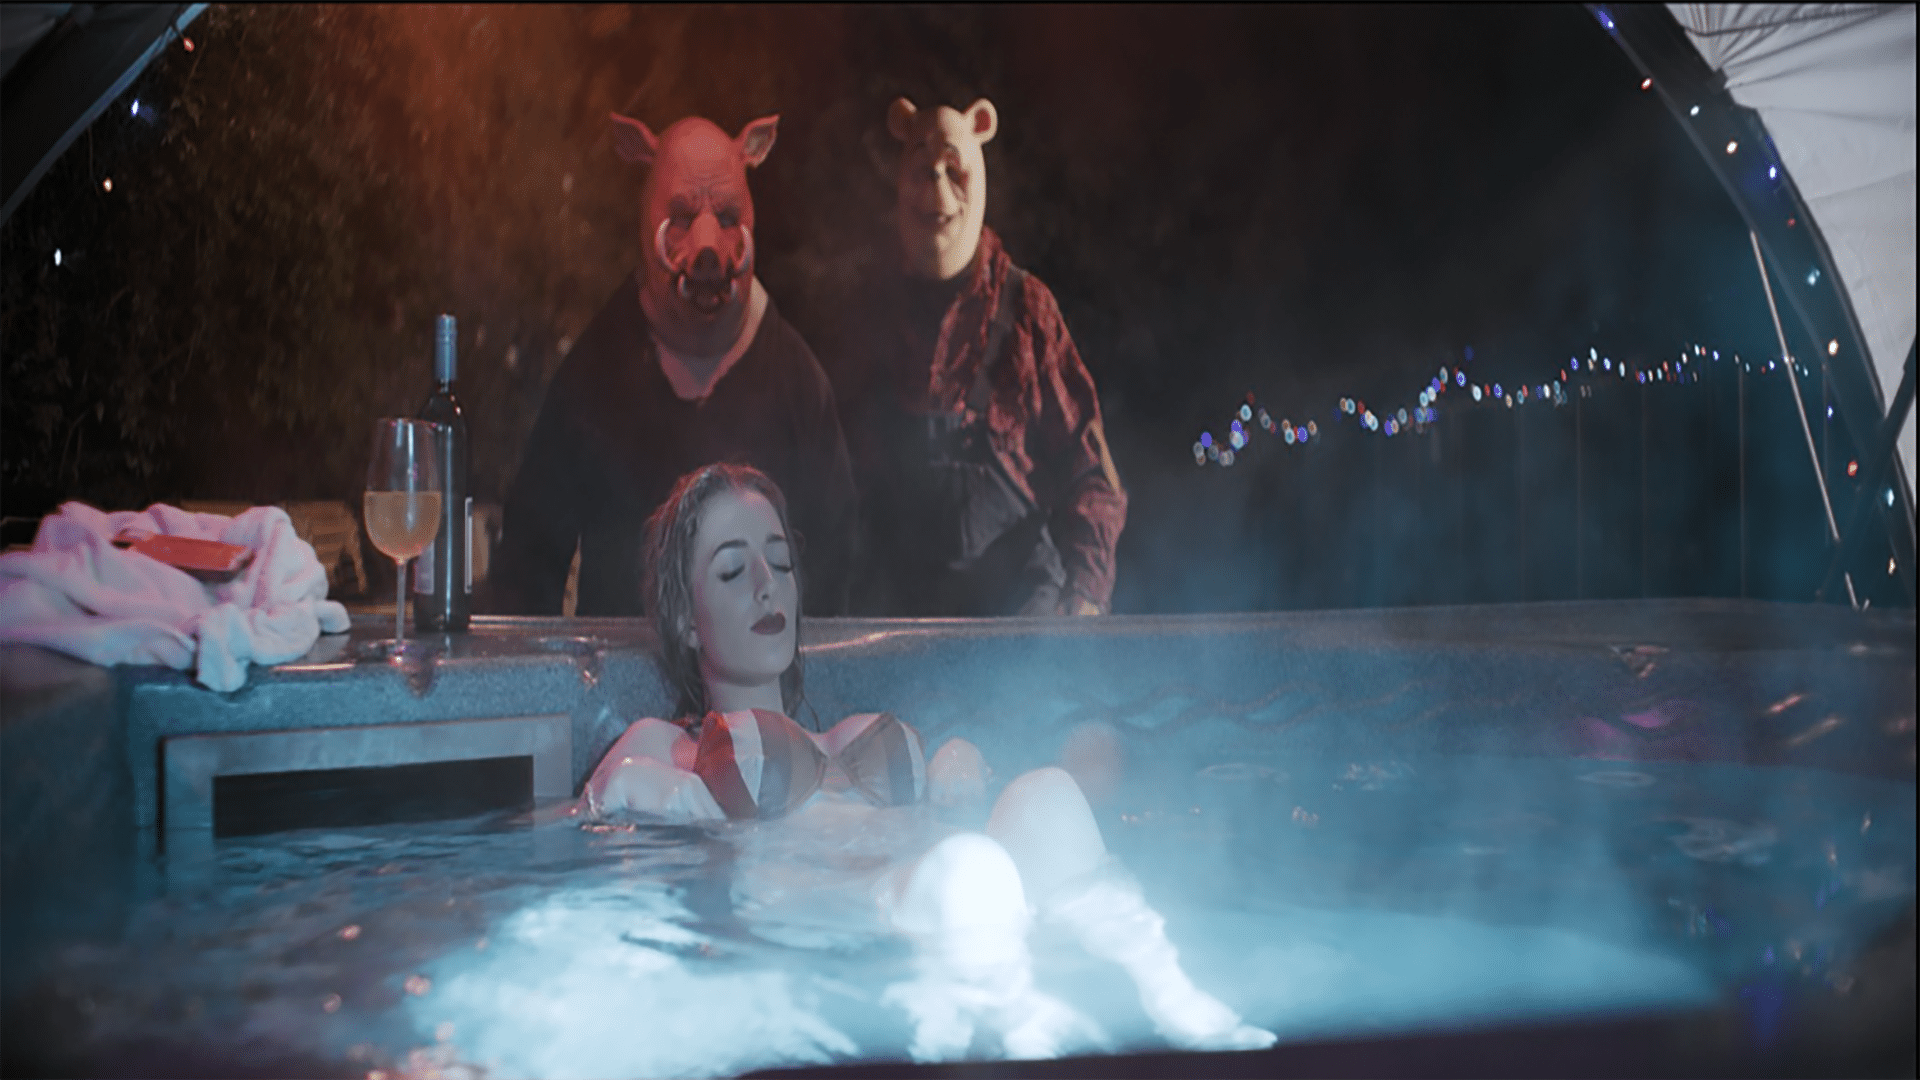 woman in hotub with eyes closed. behind her to beings, one with a winnie the pooh mask and one with a piglet mask are lurking over her